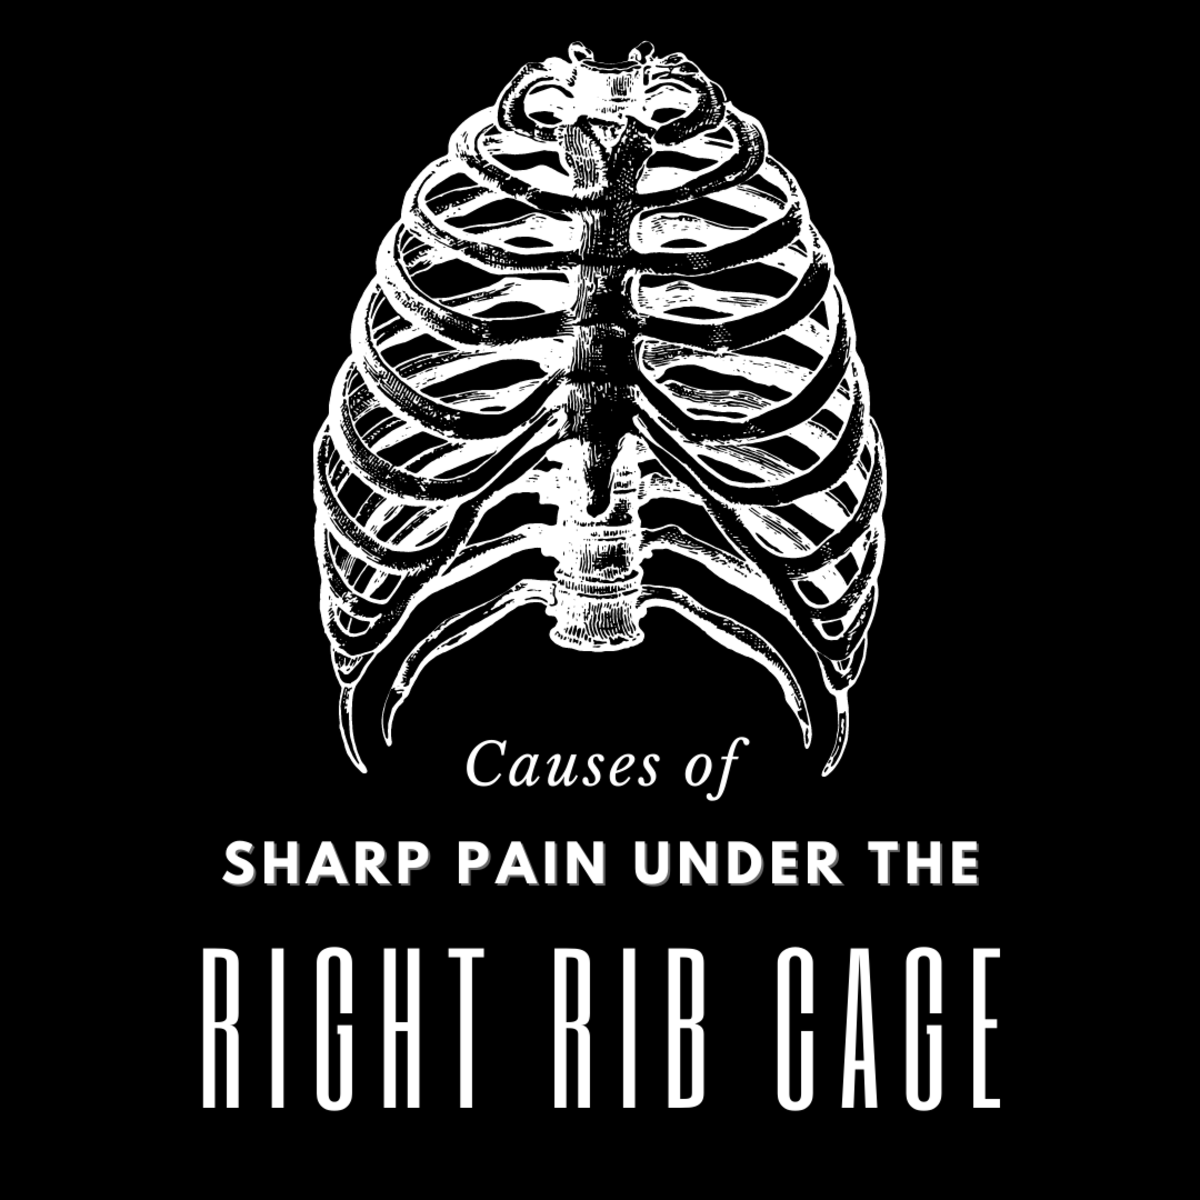 What Causes Sharp Pain Under the Right Rib Cage?